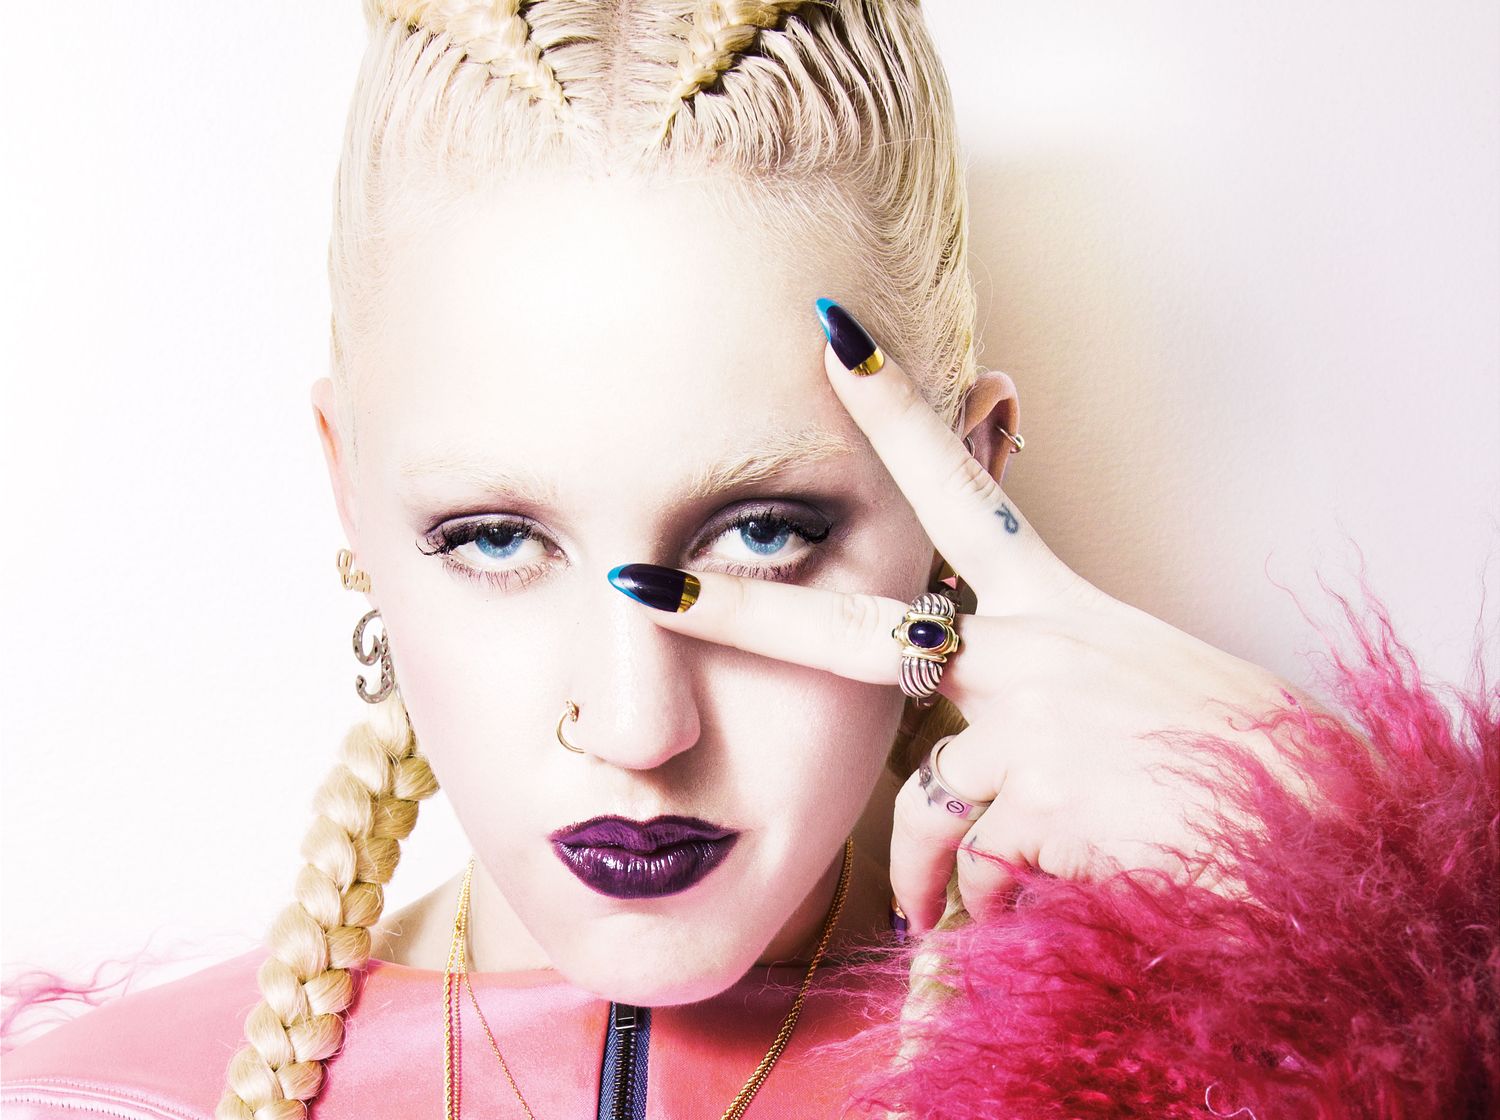 http://pixel.nymag.com/imgs/daily/vulture/2013/03/15/15-brooke-candy.w750.h560.2x.jpg